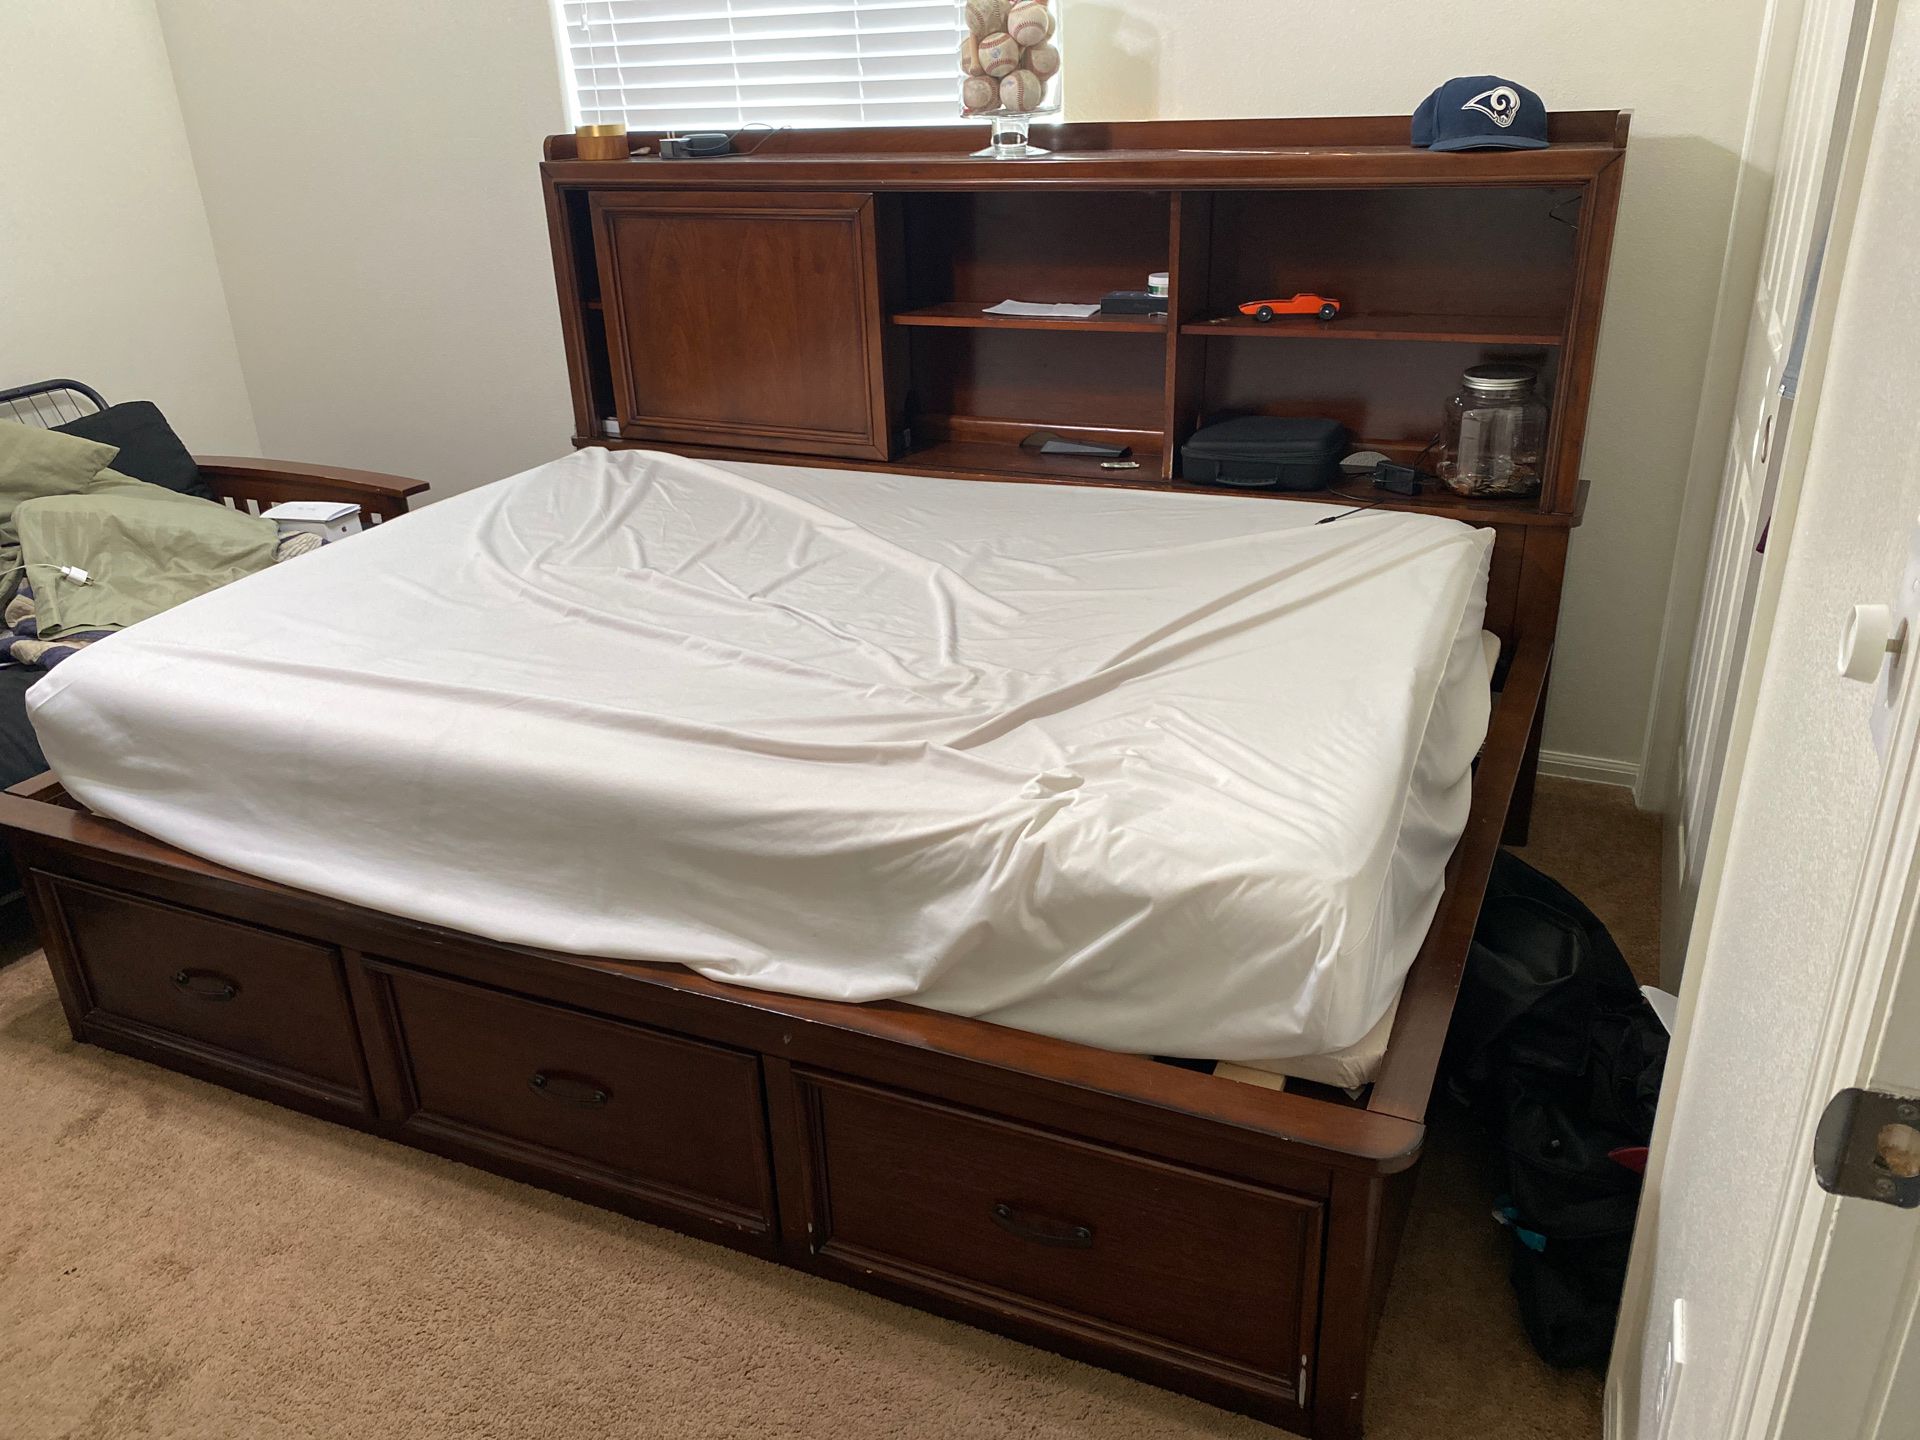 Bed frame with drawers, shelves, lights, plugs , mattress not included